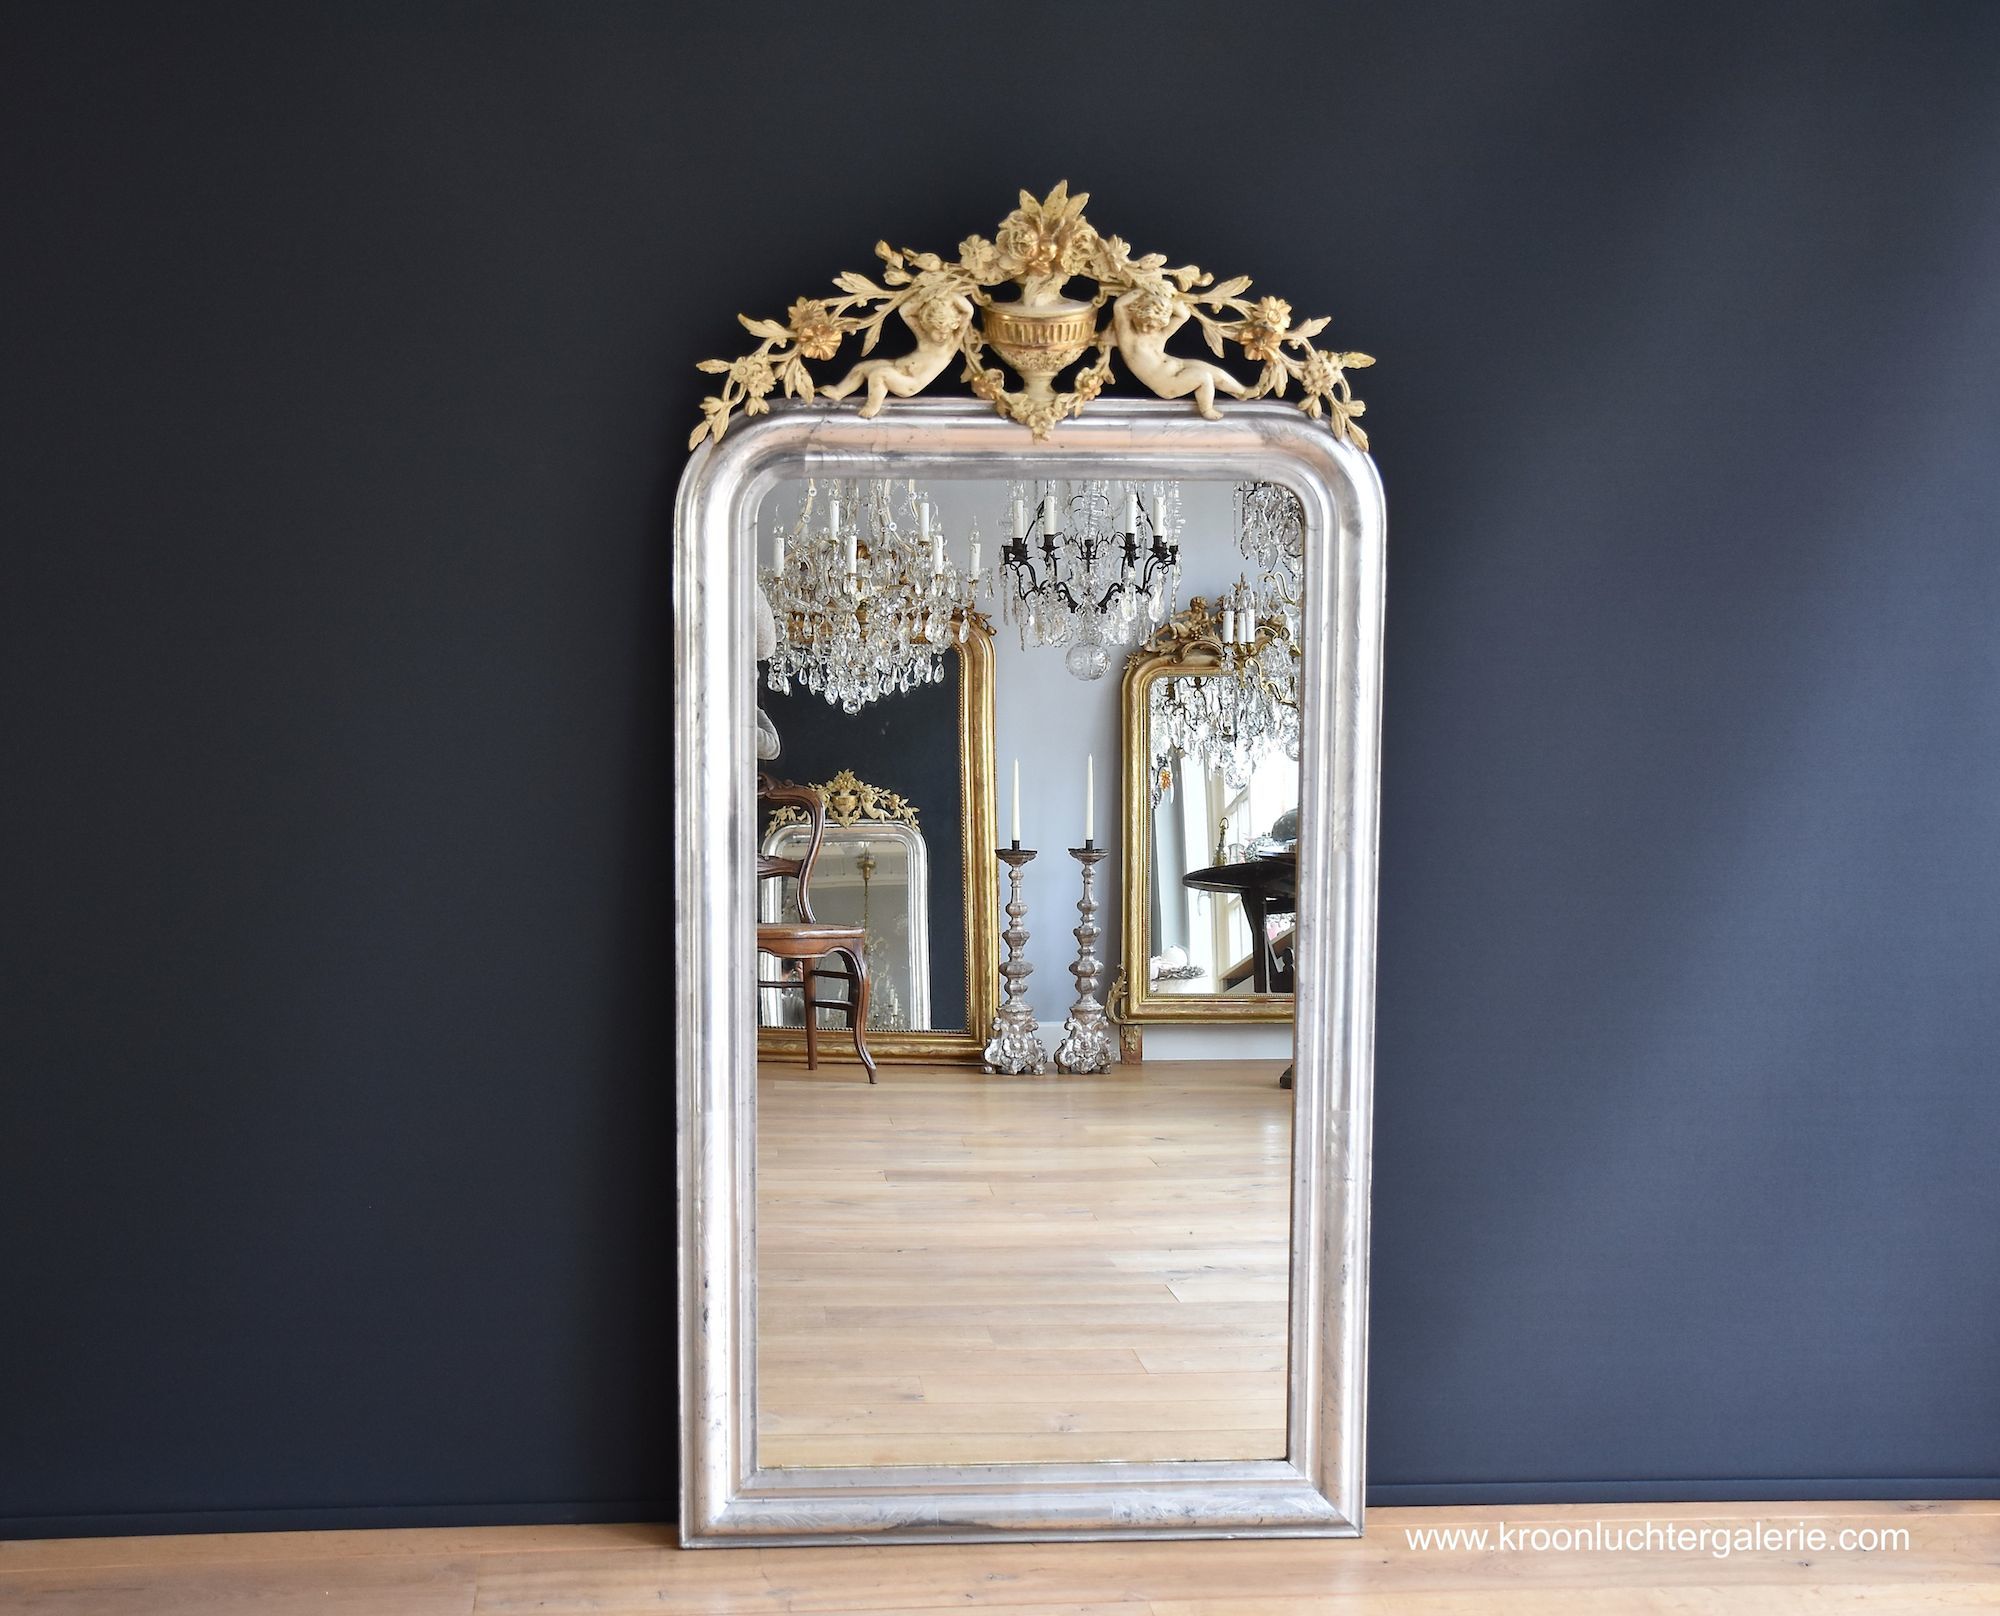 Antique French mirror with a crest, Silver-leaf